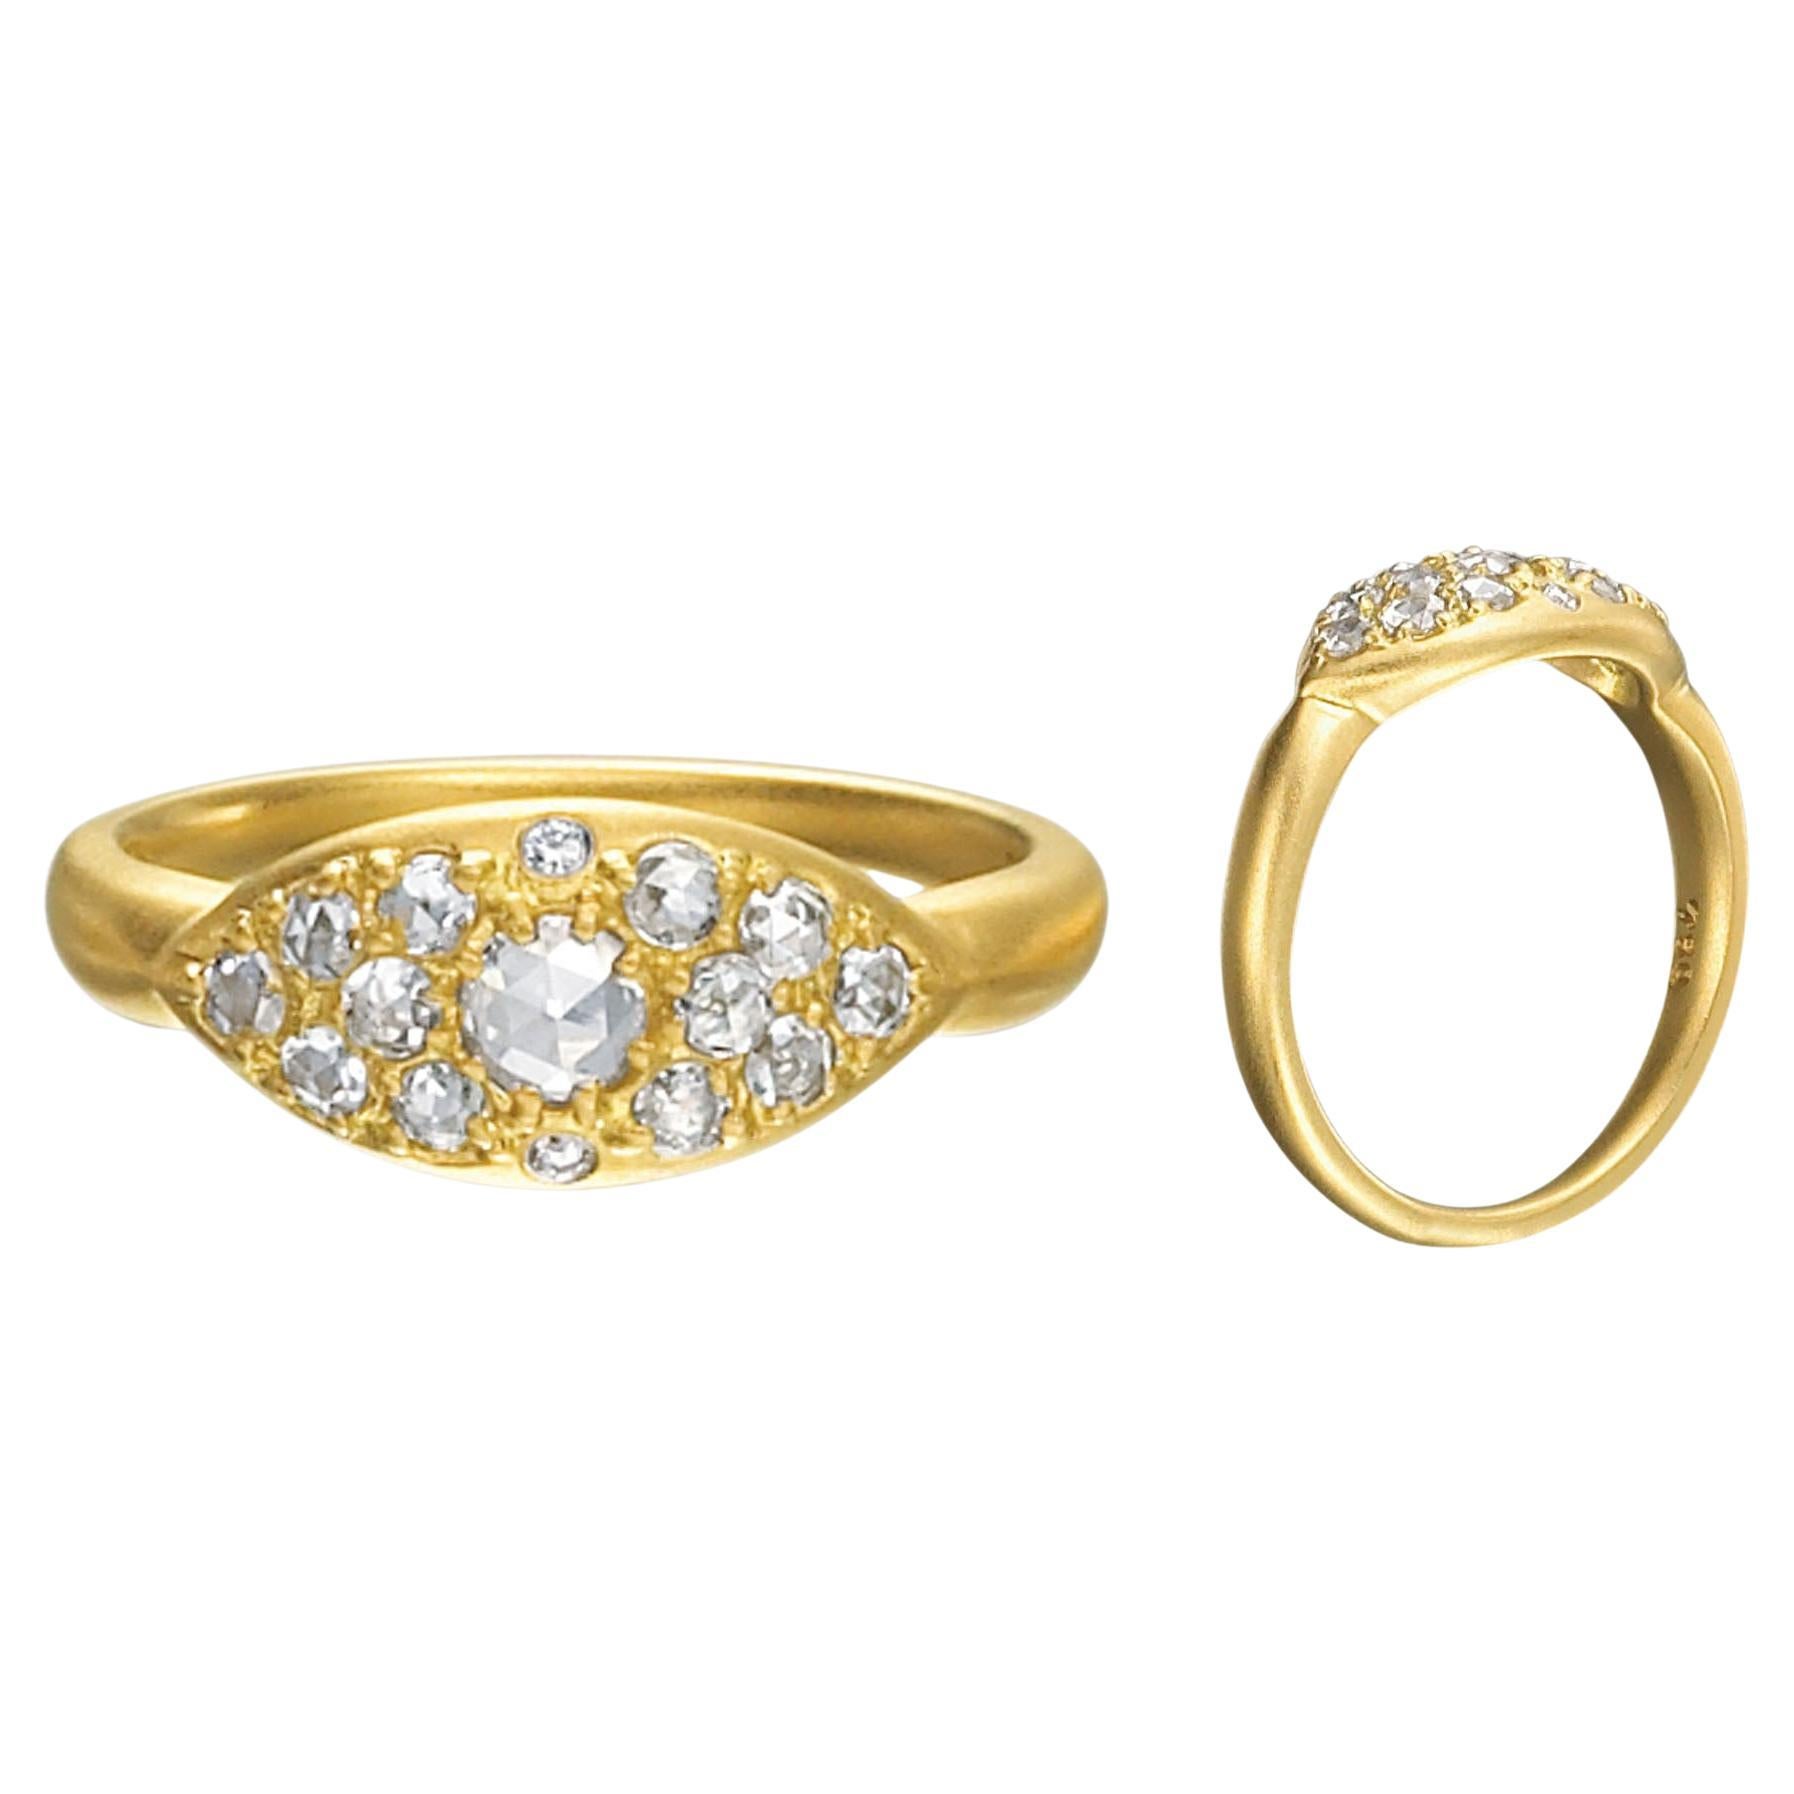 18 Karat Yellow Gold Domed Band Ring with White Rose Cut Diamonds 